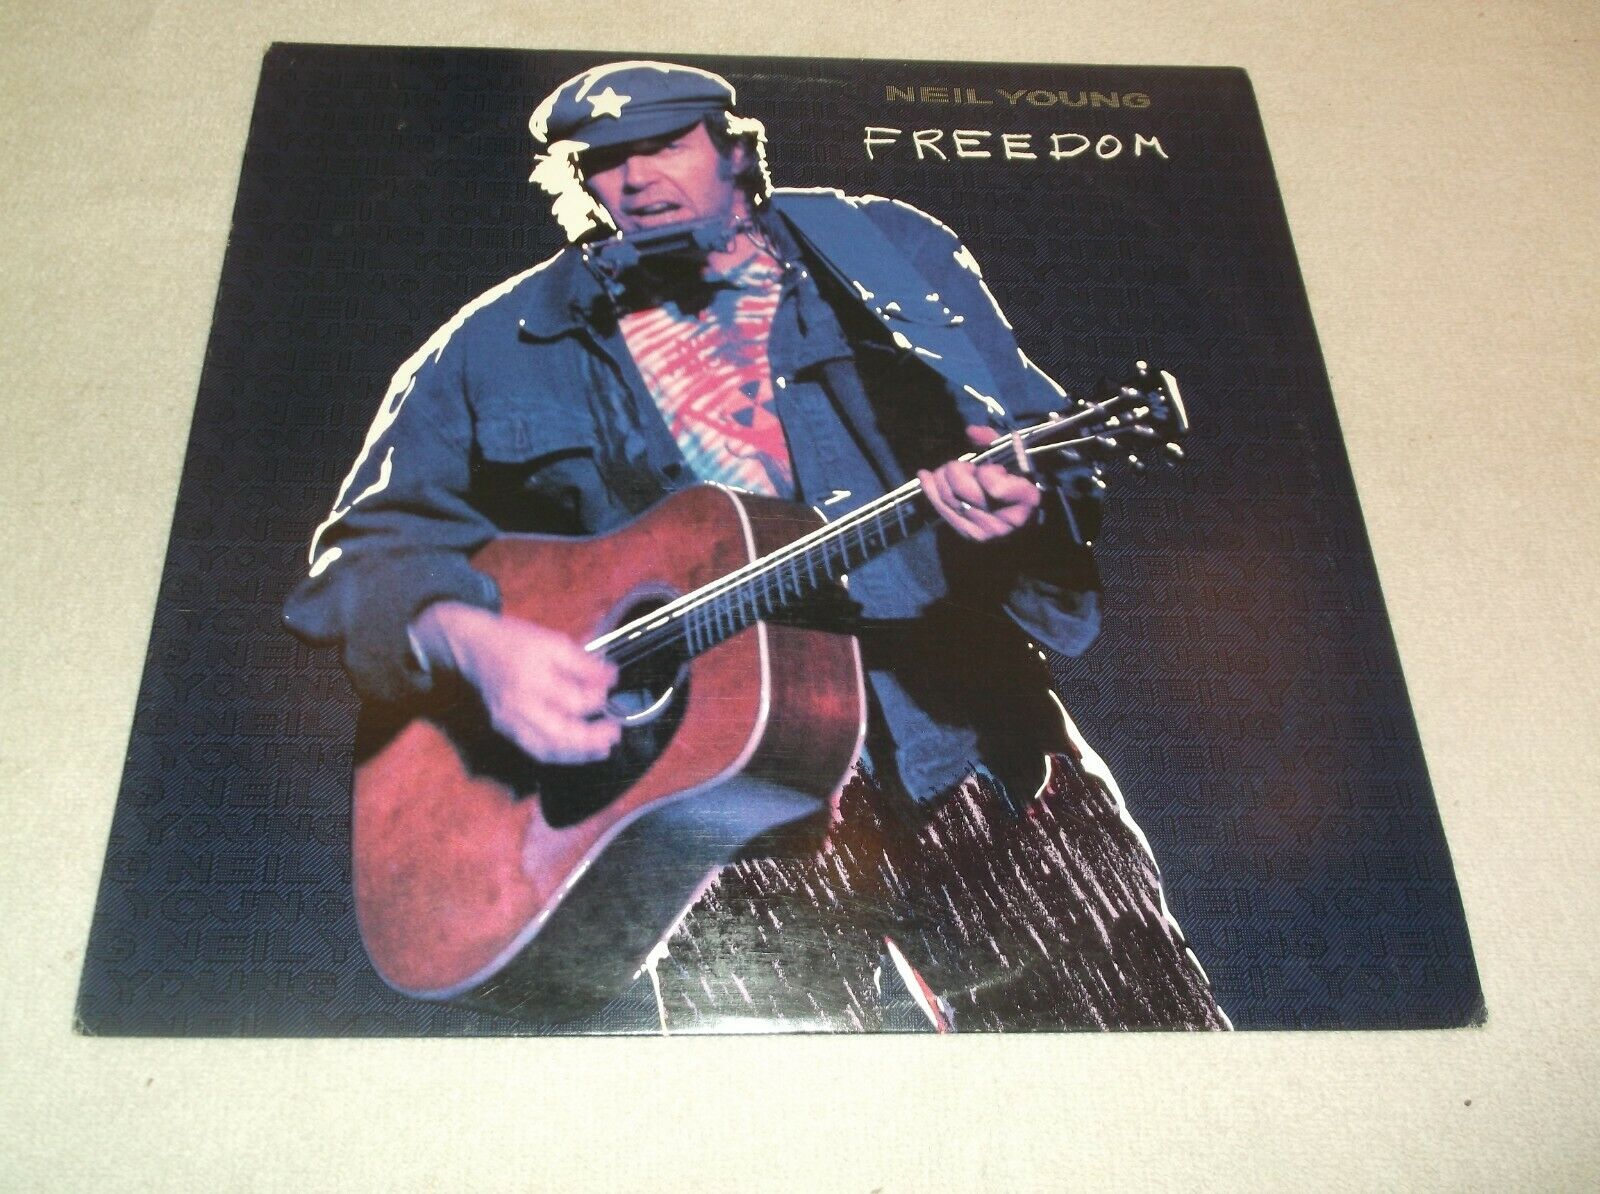 Pic 1 Neil Young, 1989 Freedom & 1986 Landing On Water, Vinyl Records.